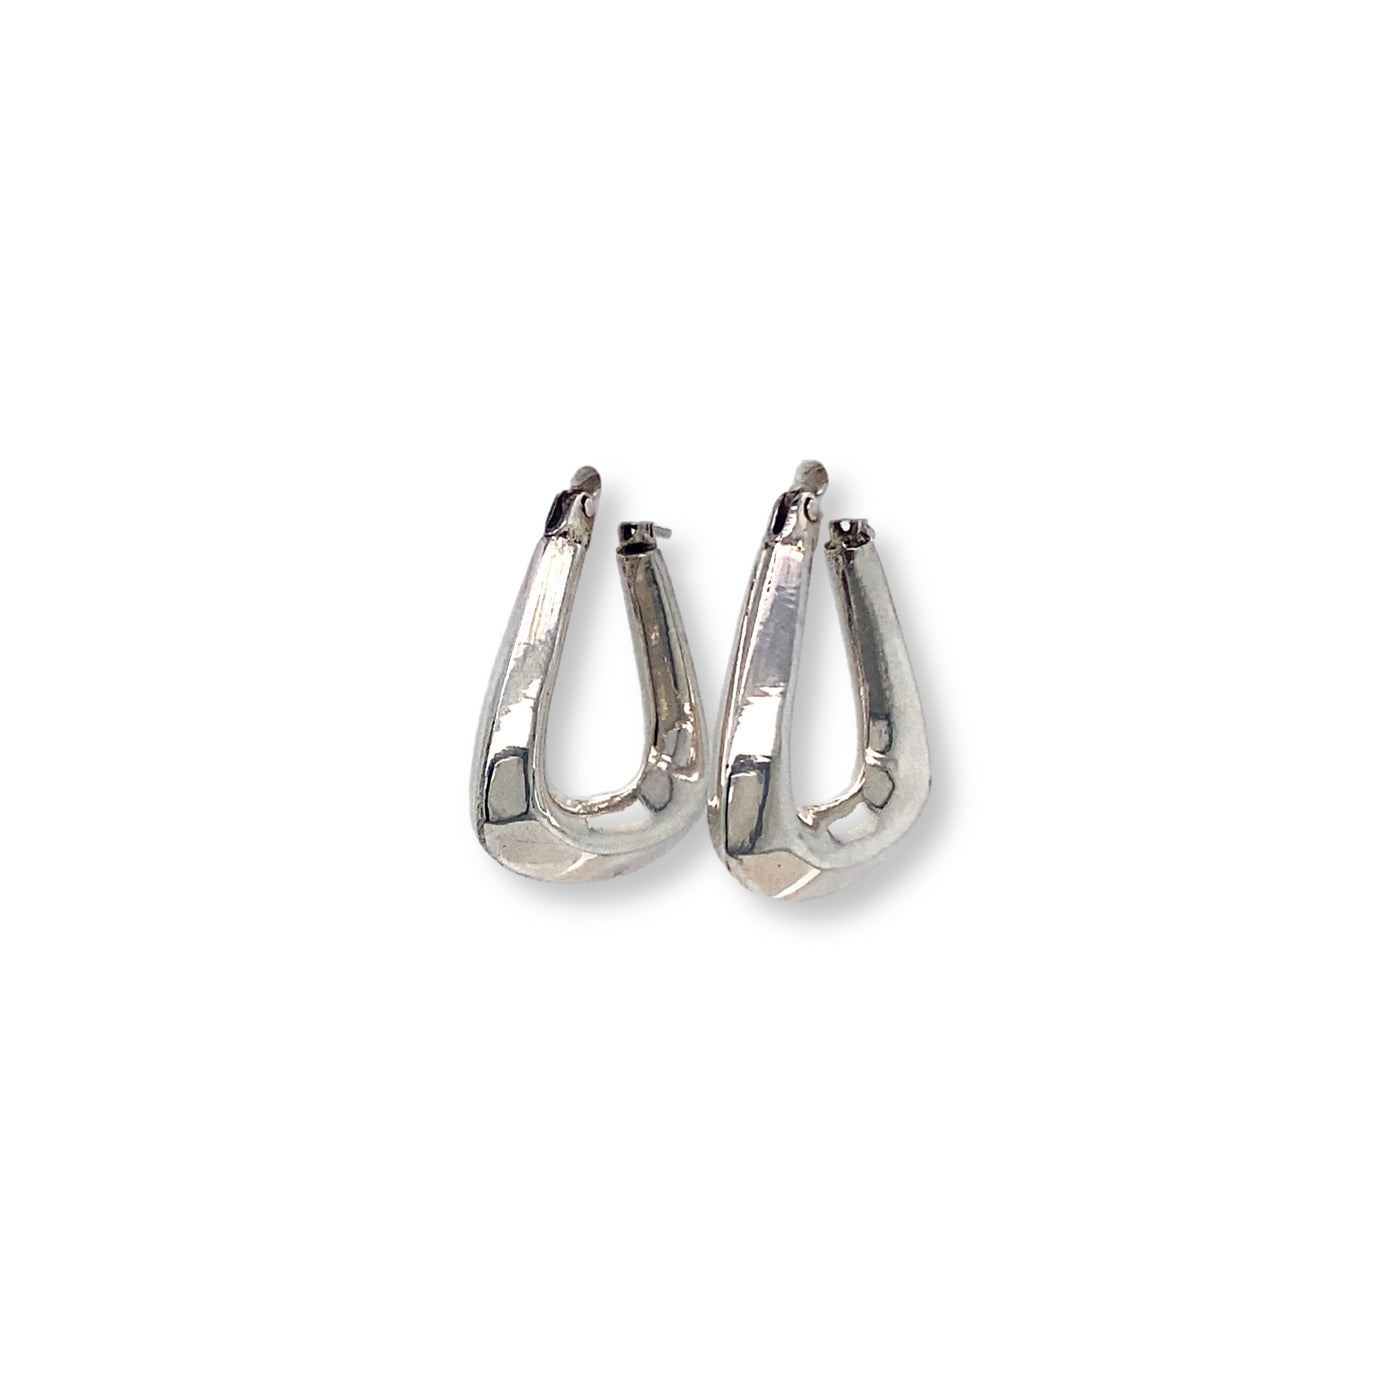 Sterling silver handcrafted triangular style huggie earrings